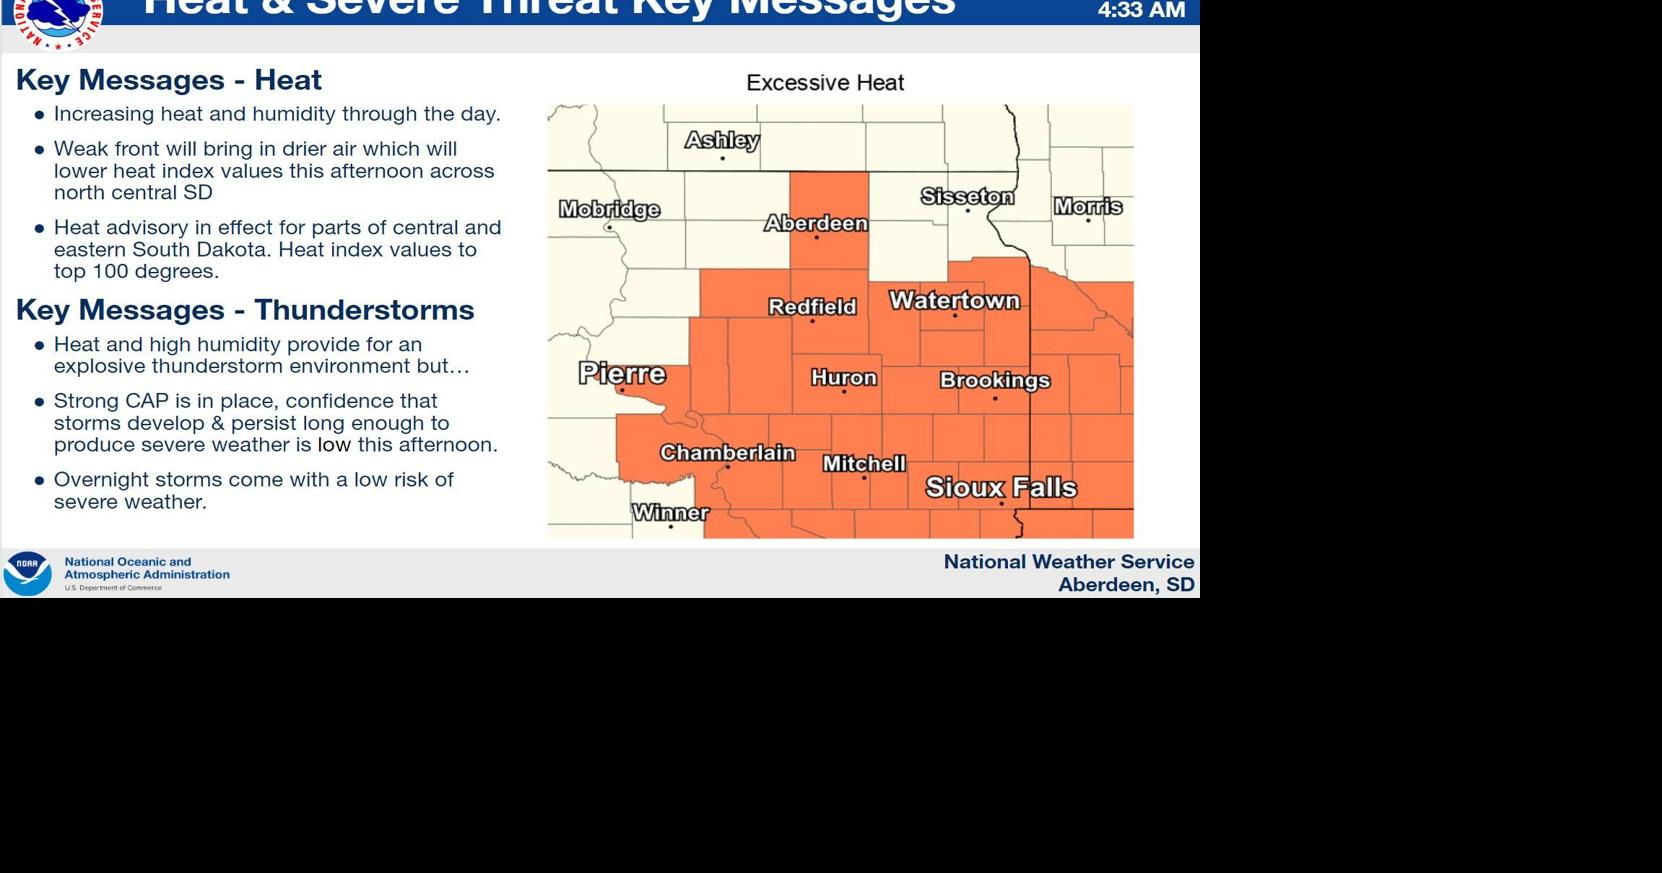 Heat warning issued for South Dakota counties amid rising temperatures | Local news